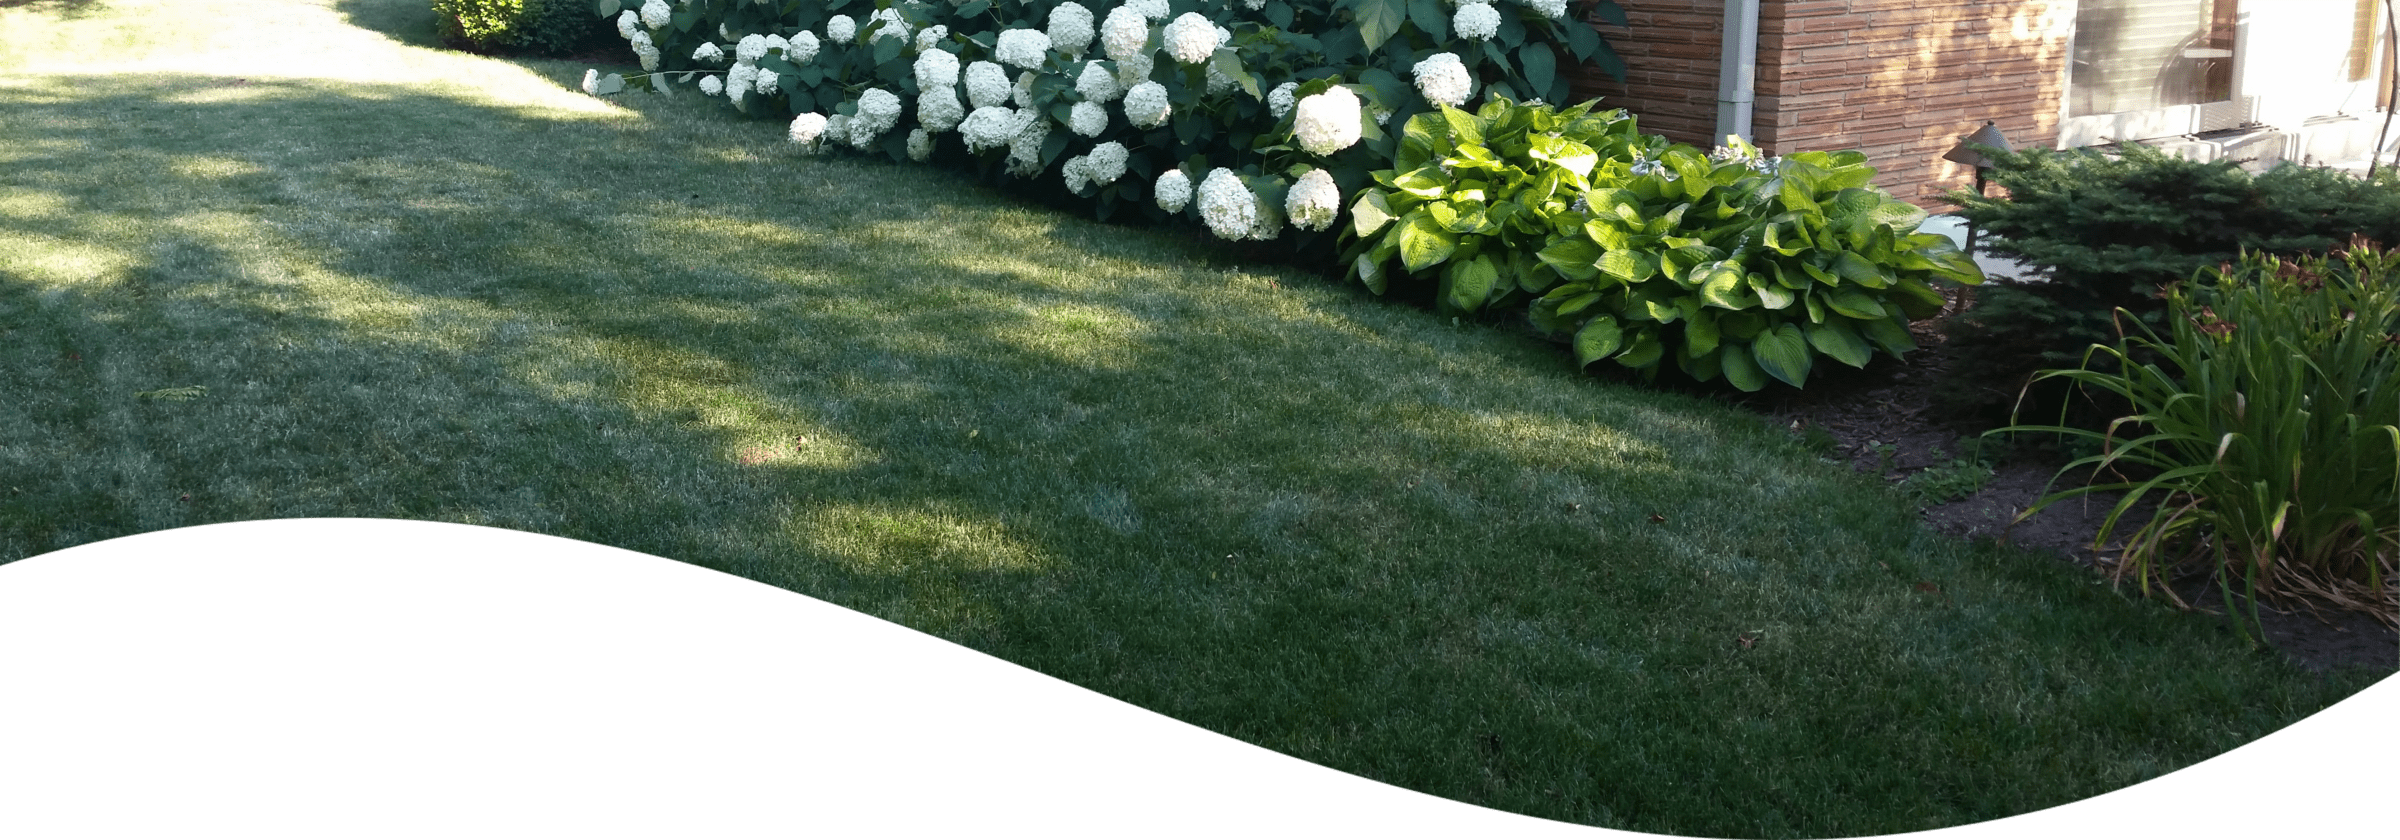 This image shows a well-maintained garden with lush green grass, Hydrangea bushes with white blooms, hostas, and a small evergreen shrub.